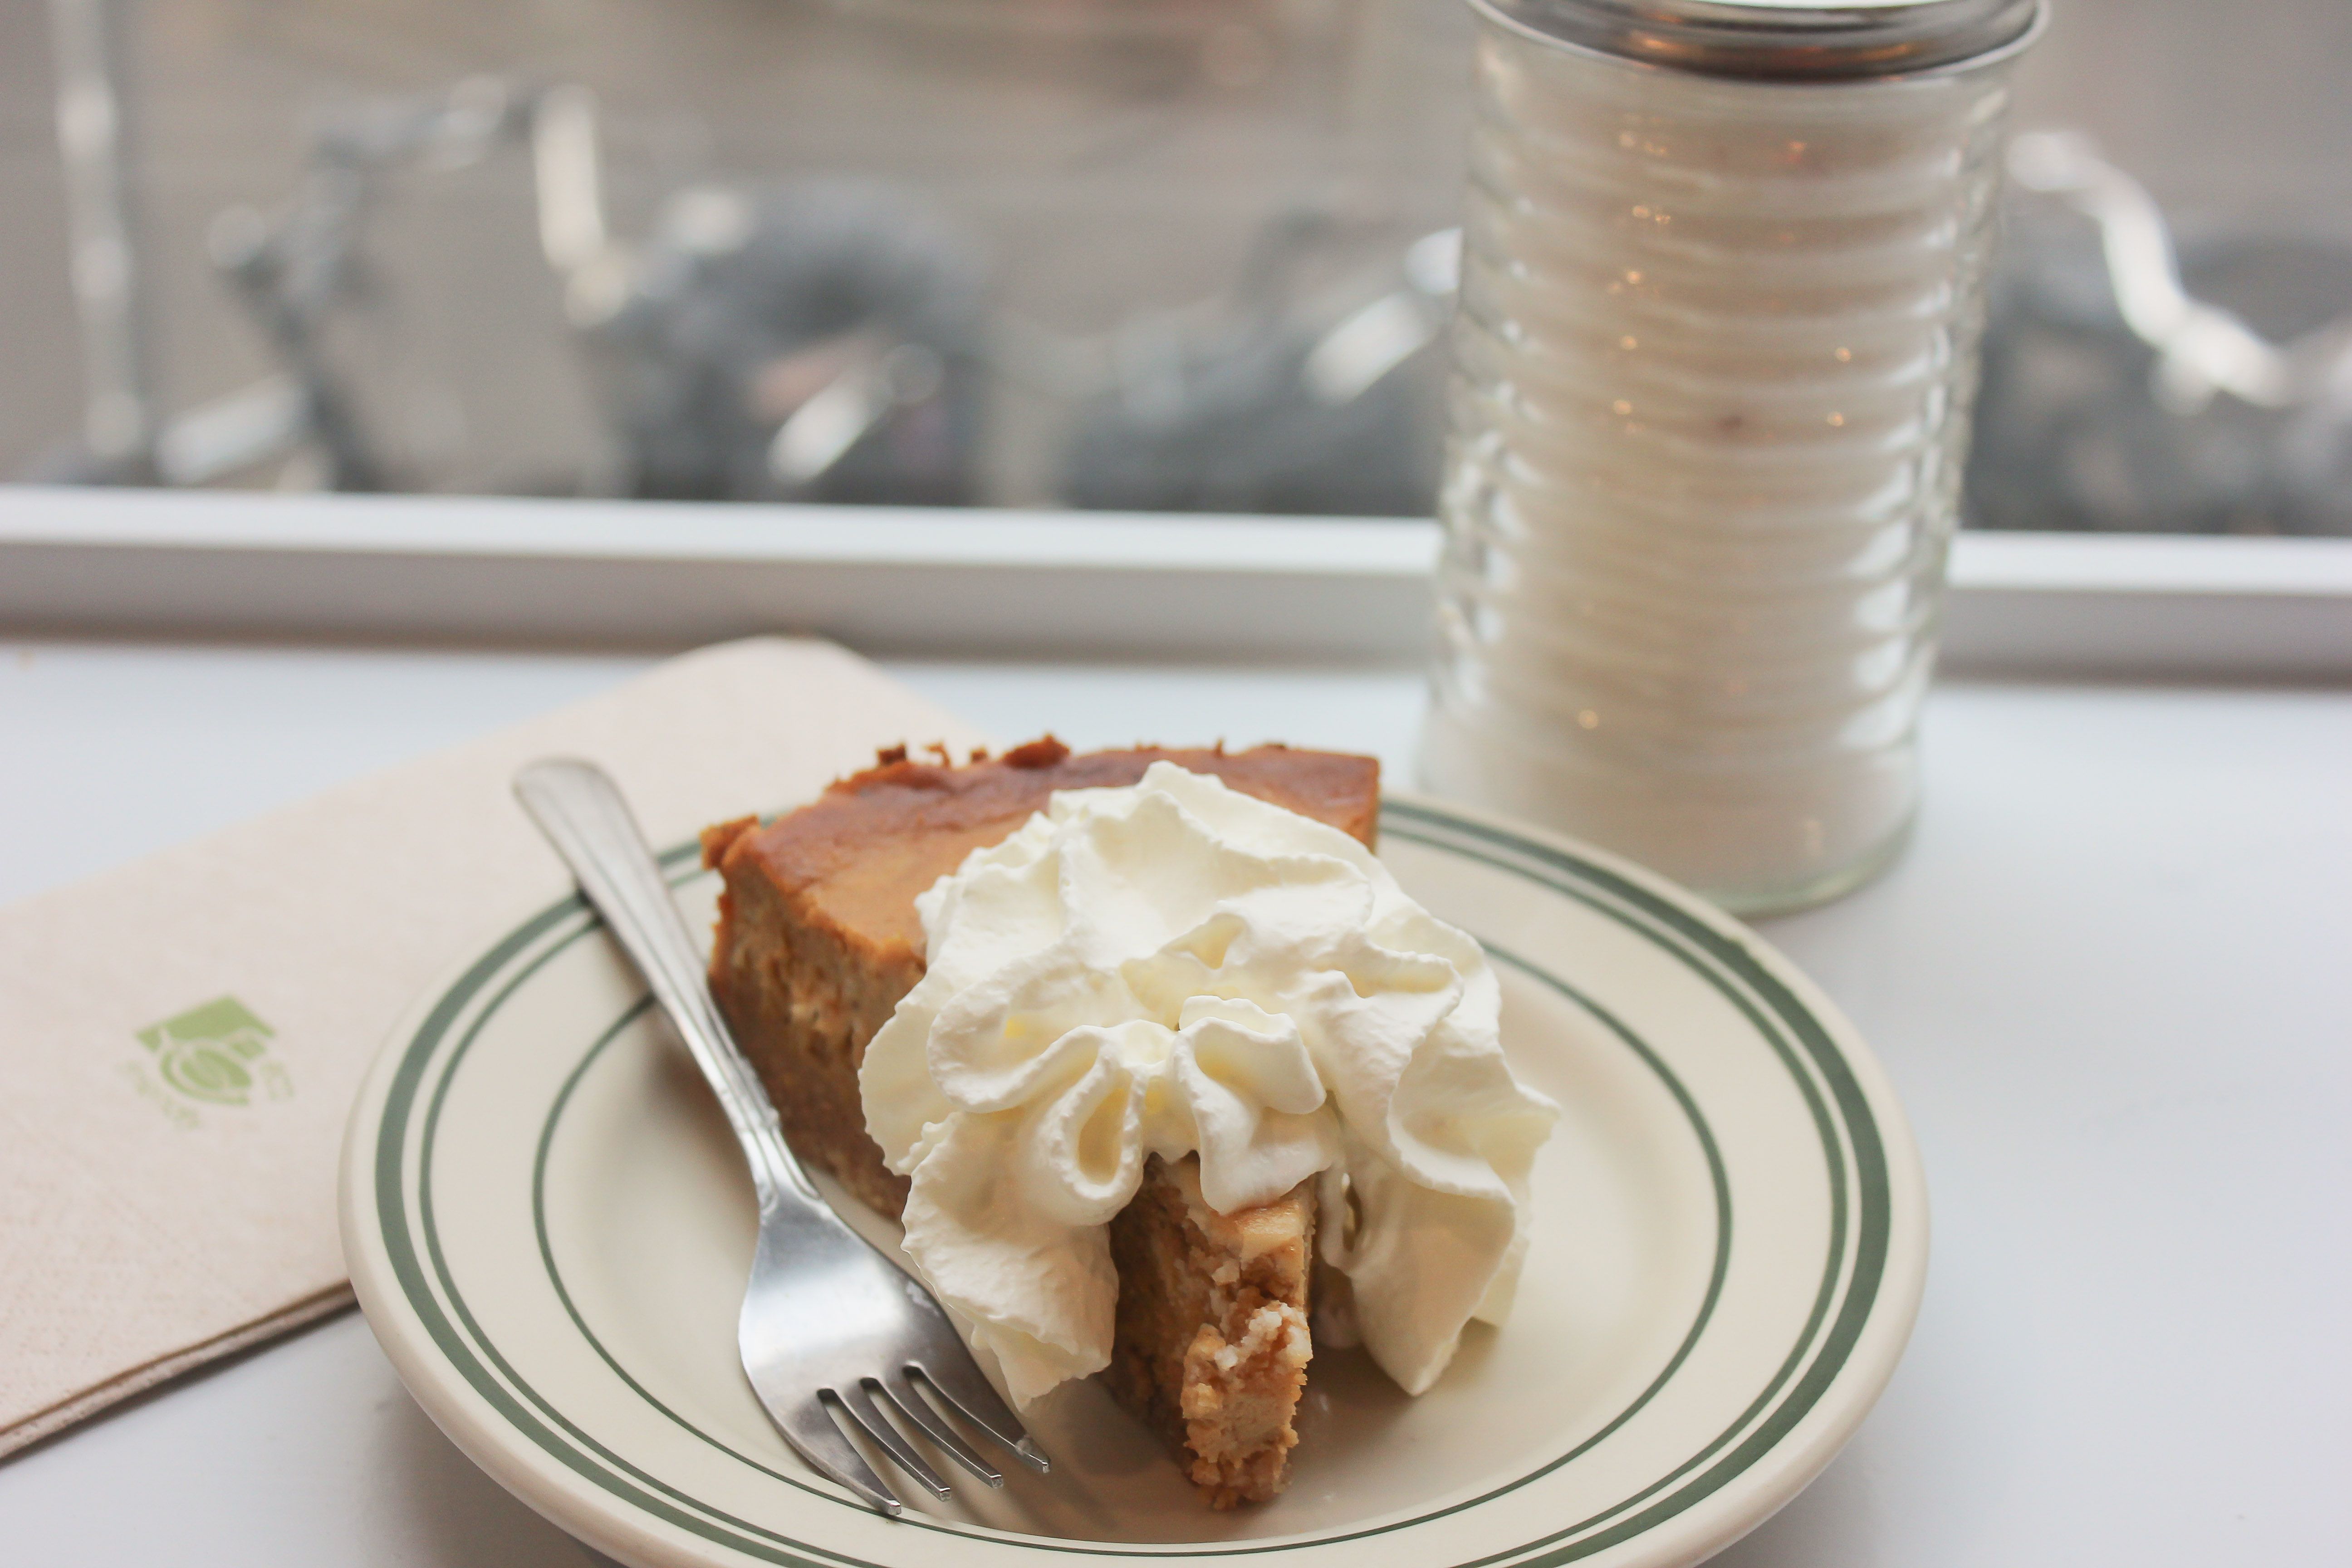 Why Copenhagen is giving thanks to the American Pie shop